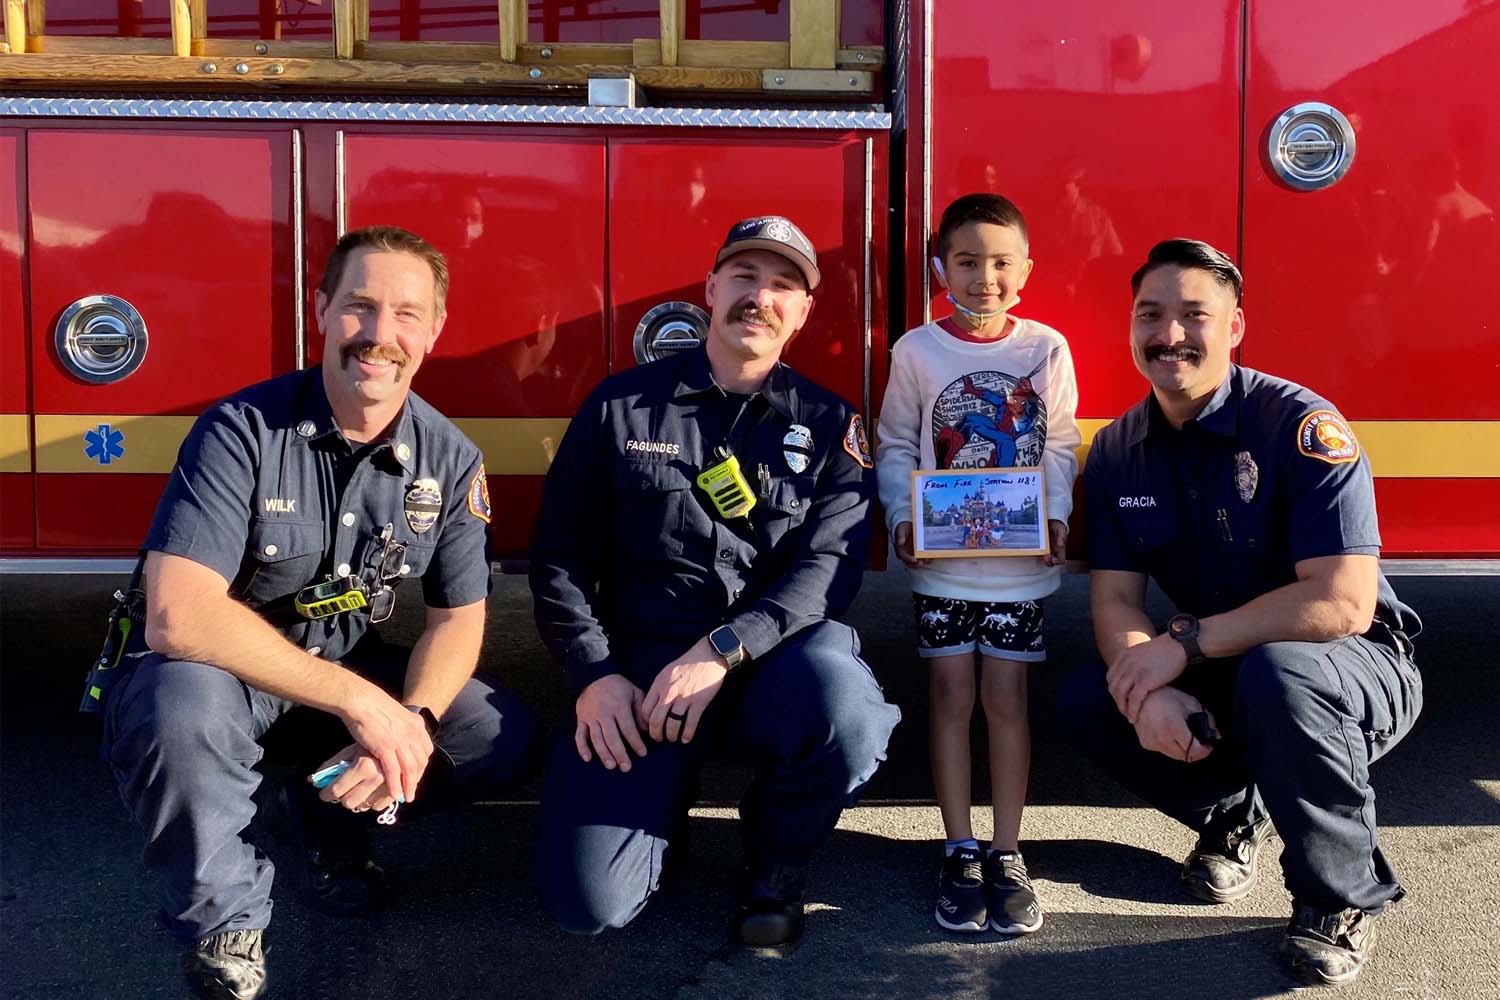 Firefighters reunite with young boy who tragically lost his mother.